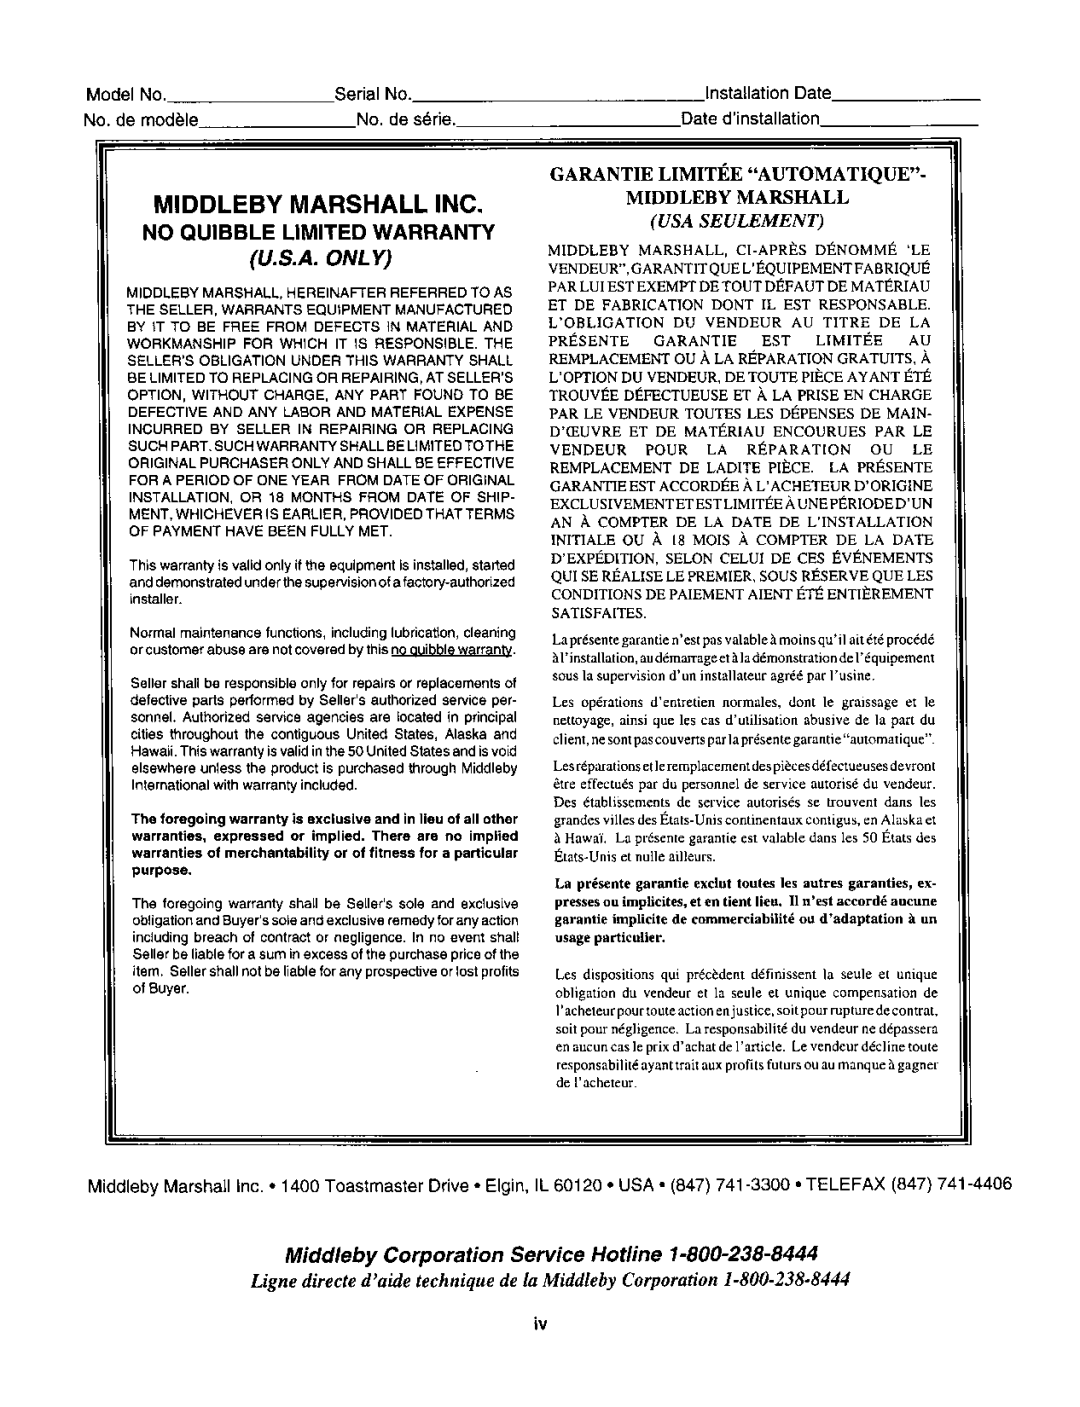 Middleby Marshall PS200 manual 